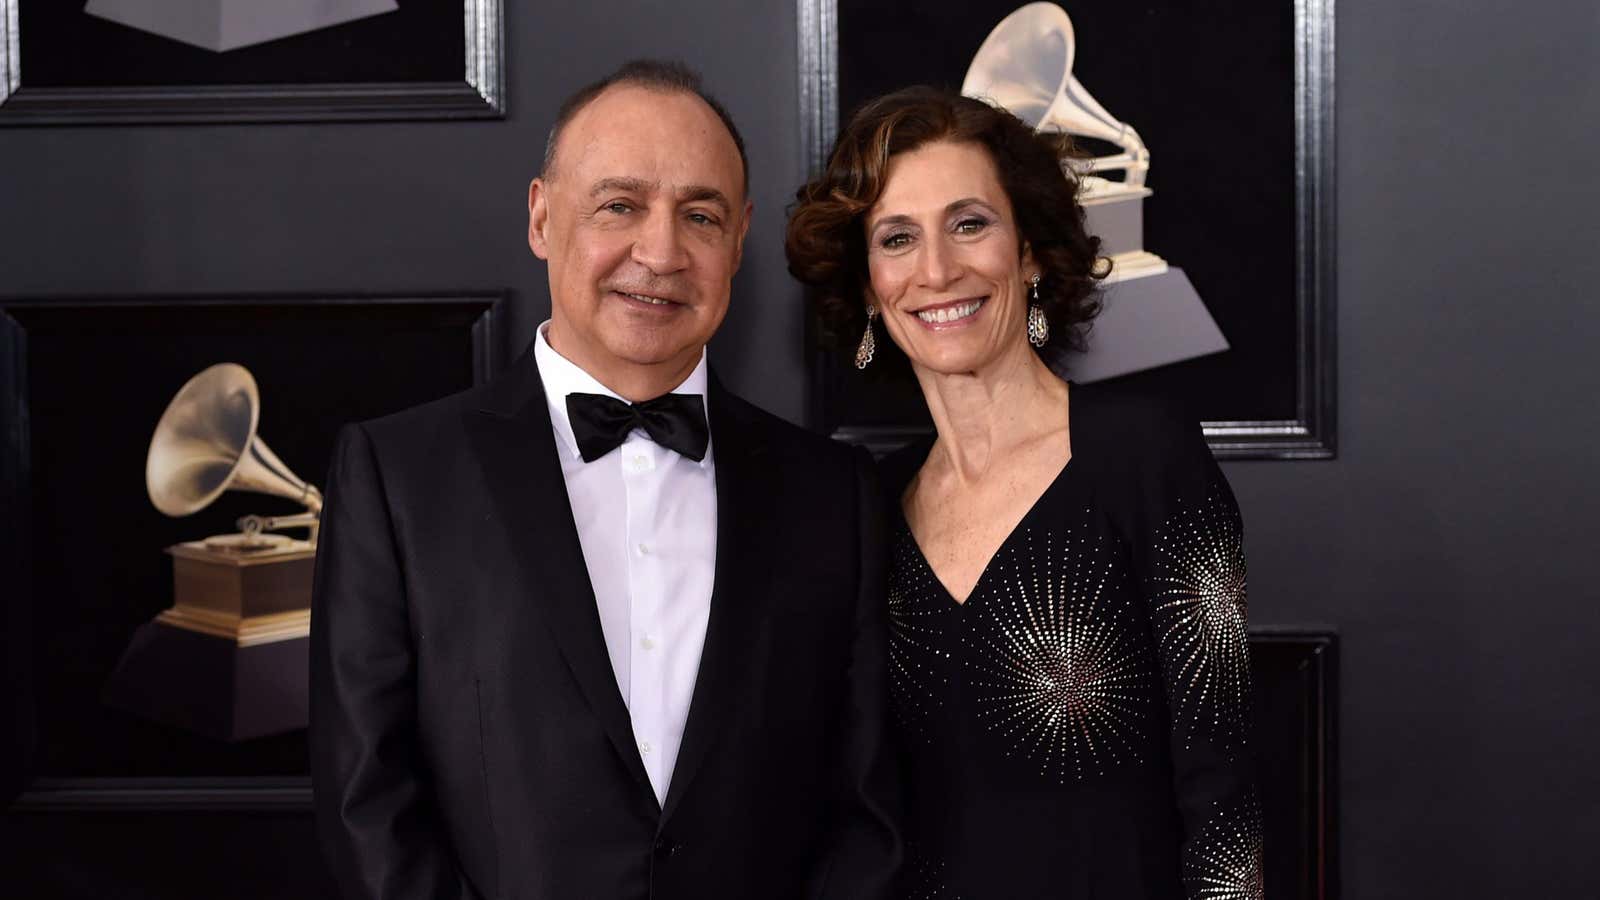 Blavatnik, who owns Warner Media, attending the 2018 Grammys with his wife, Emily Appelson.